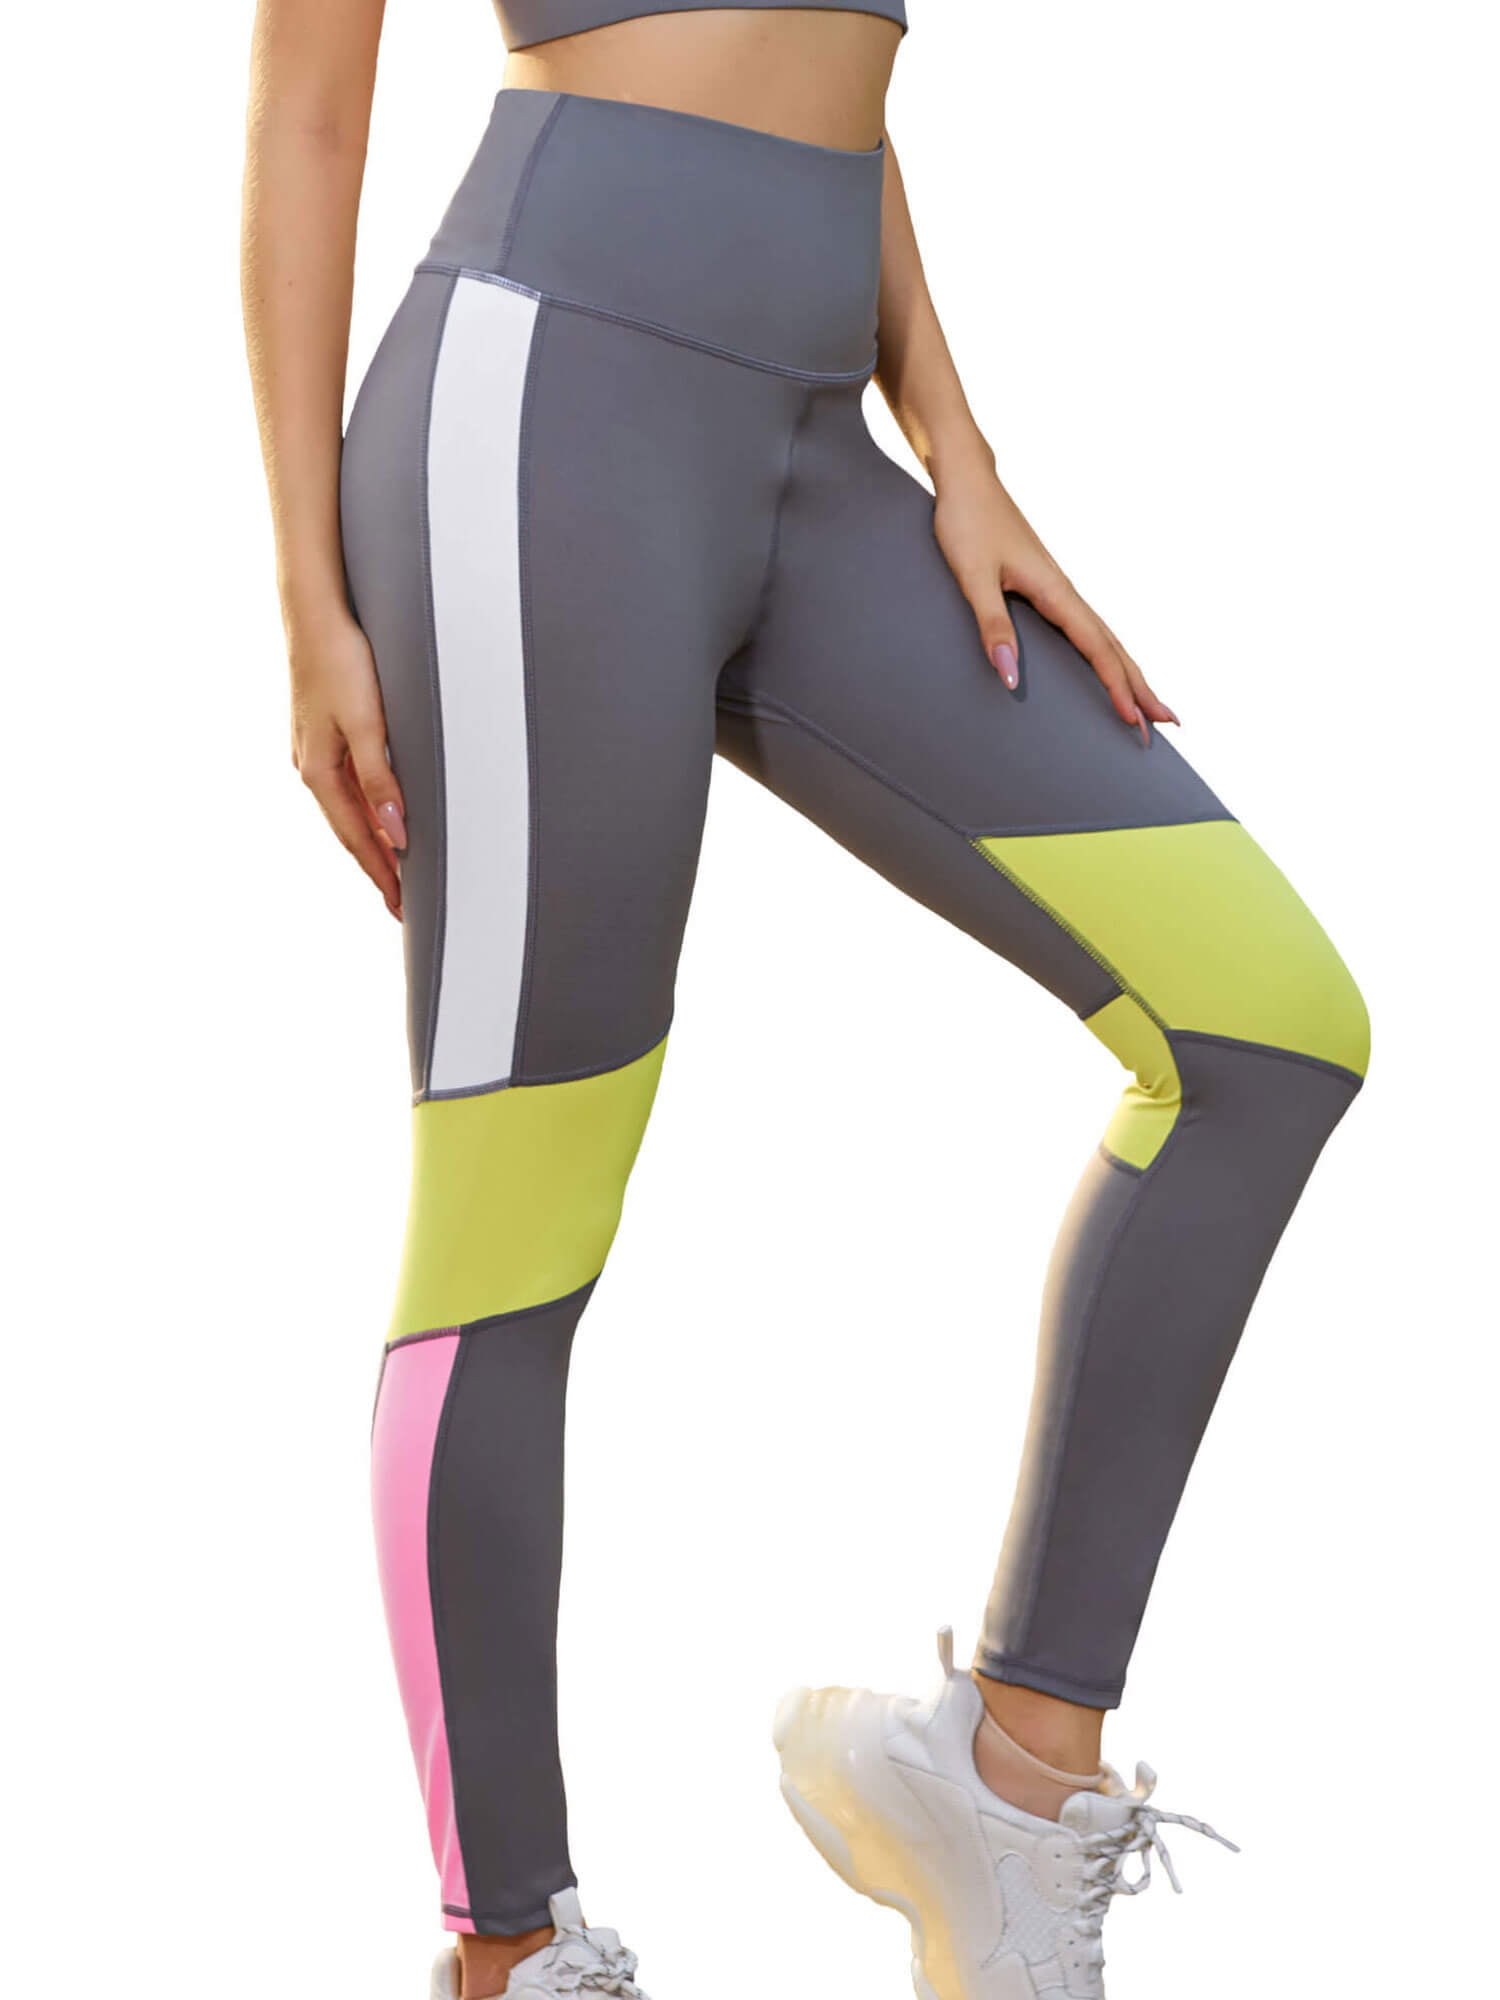 Nike Women`s Mid-rise Therma Fit Leggings/Tights Grey/Black DQ6271